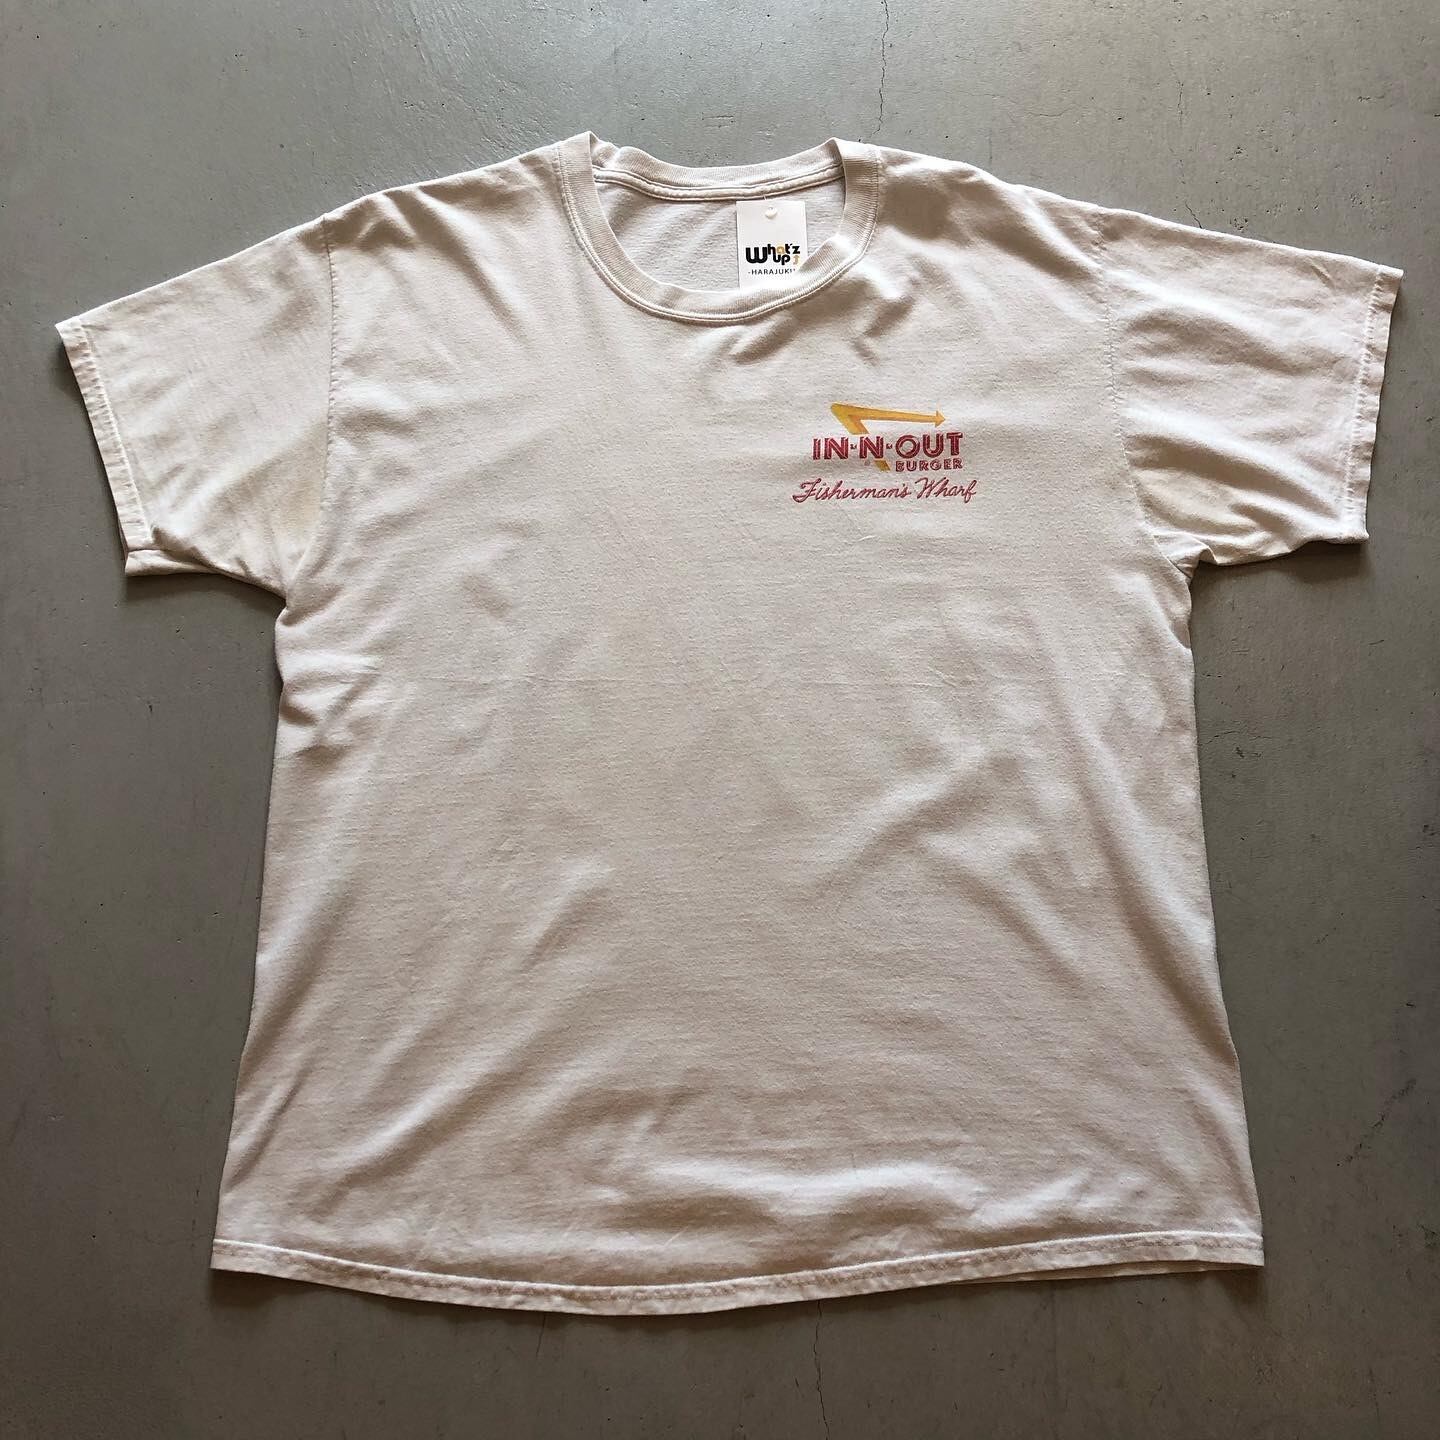 00s unknown Food T Shirt